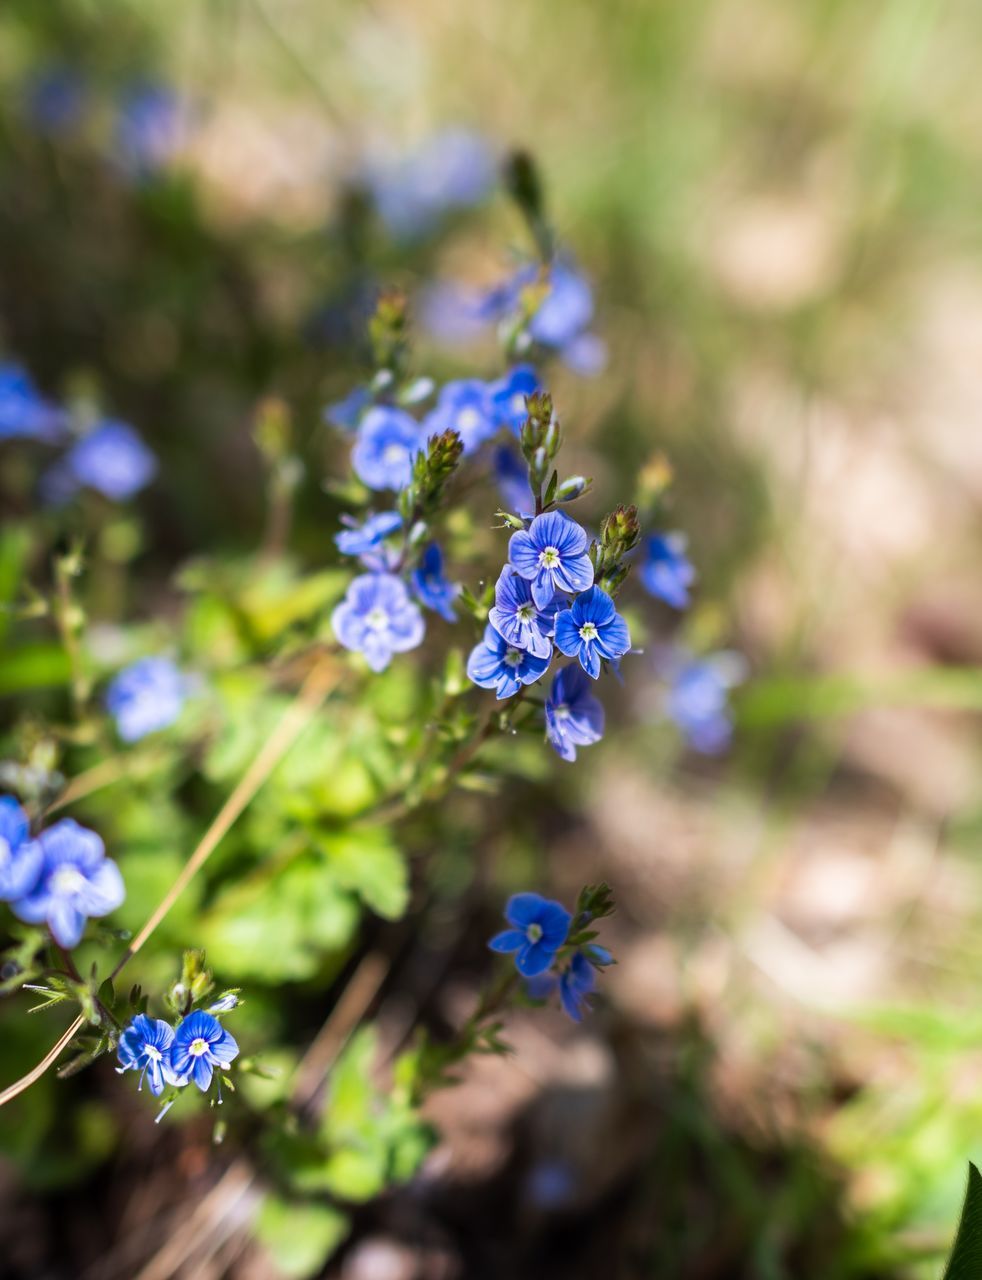 CLOSE-UP OF BLUE FLOWERING PLANT